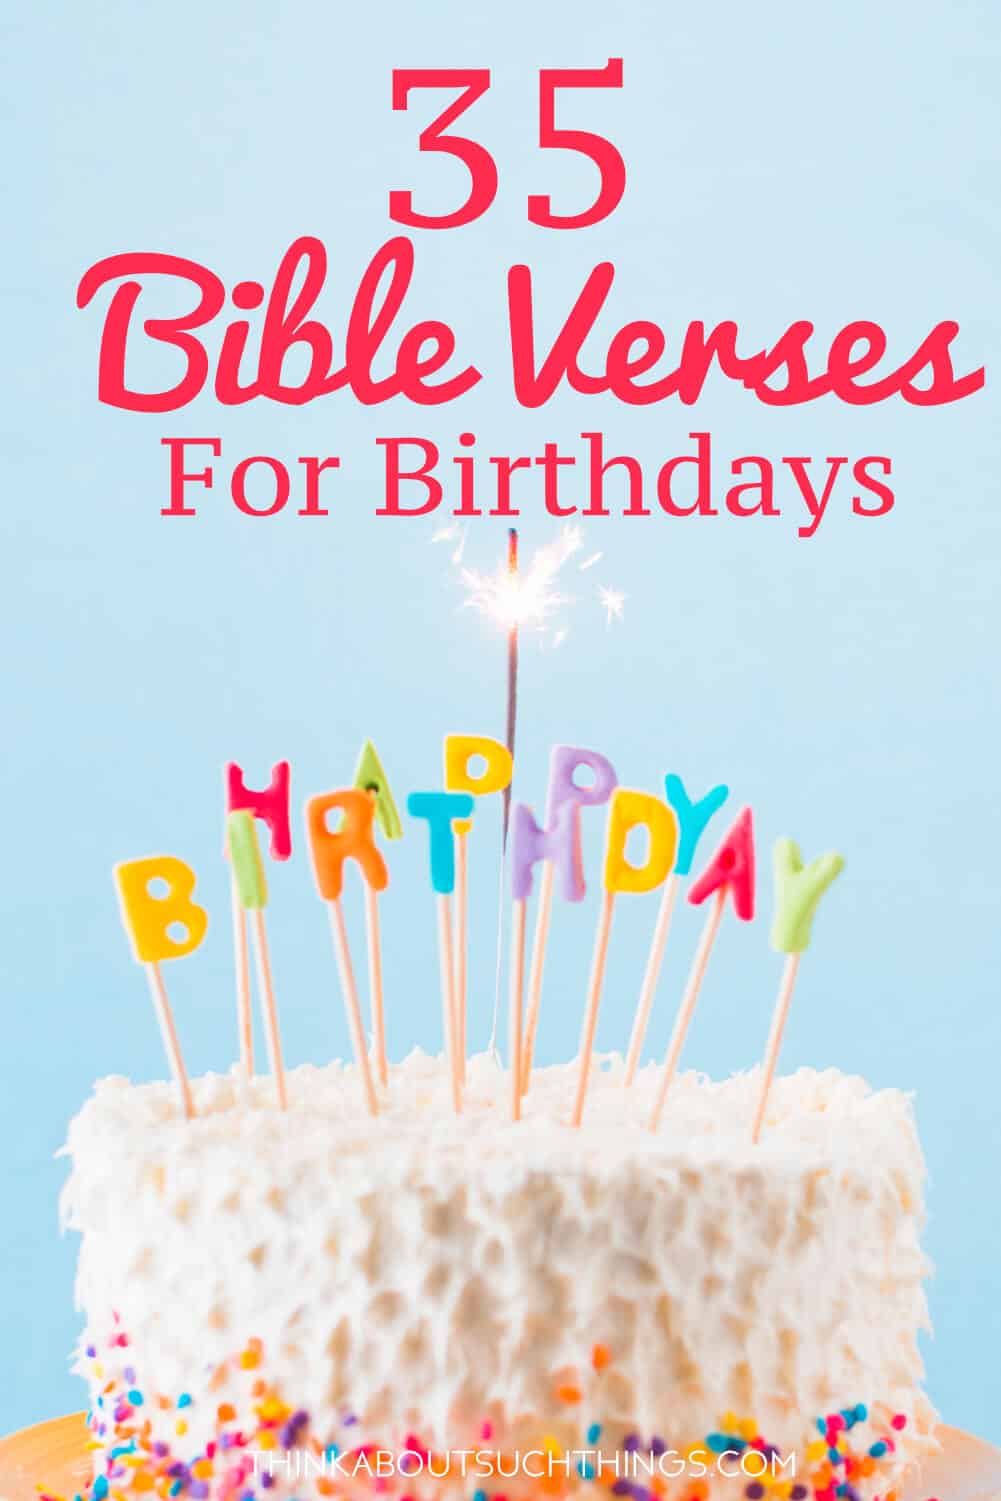 Birthday Bible Verses For Friends